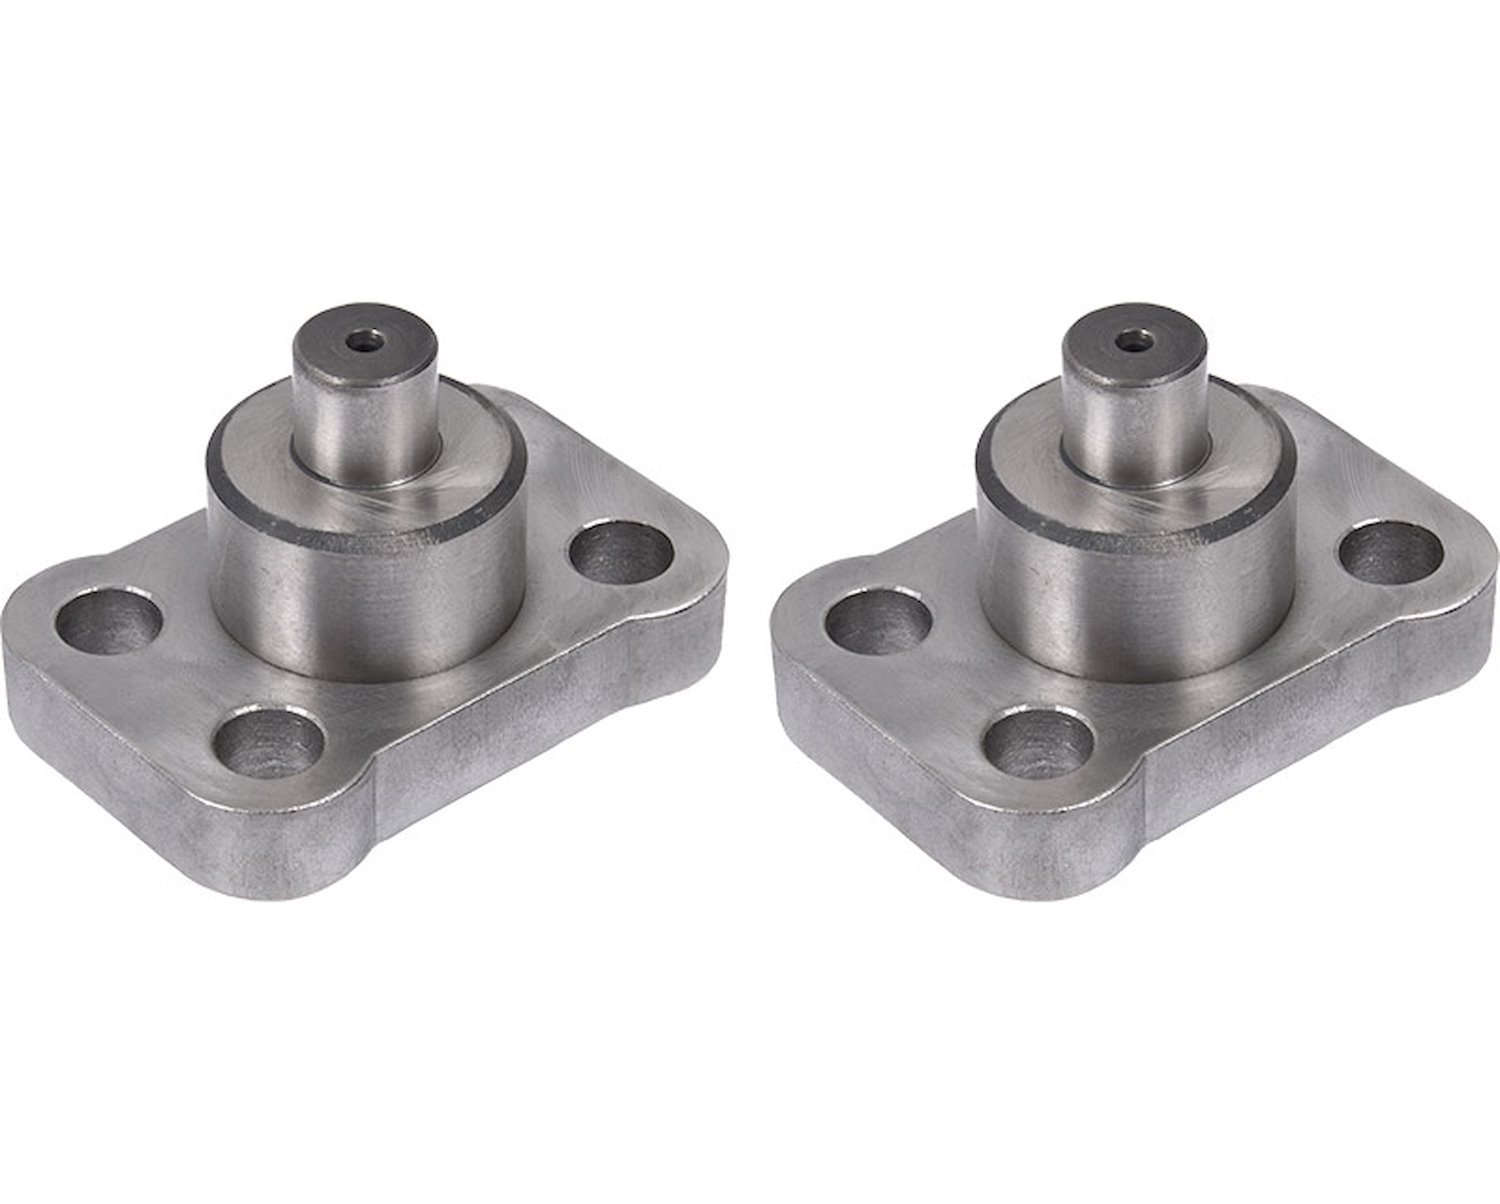 Lower Knuckle Caps for 1979-1985 Toyota Pickup, 1984-1985 Toyota 4Runner, Fits Solid Front Axle and Rock Assault Front Axle